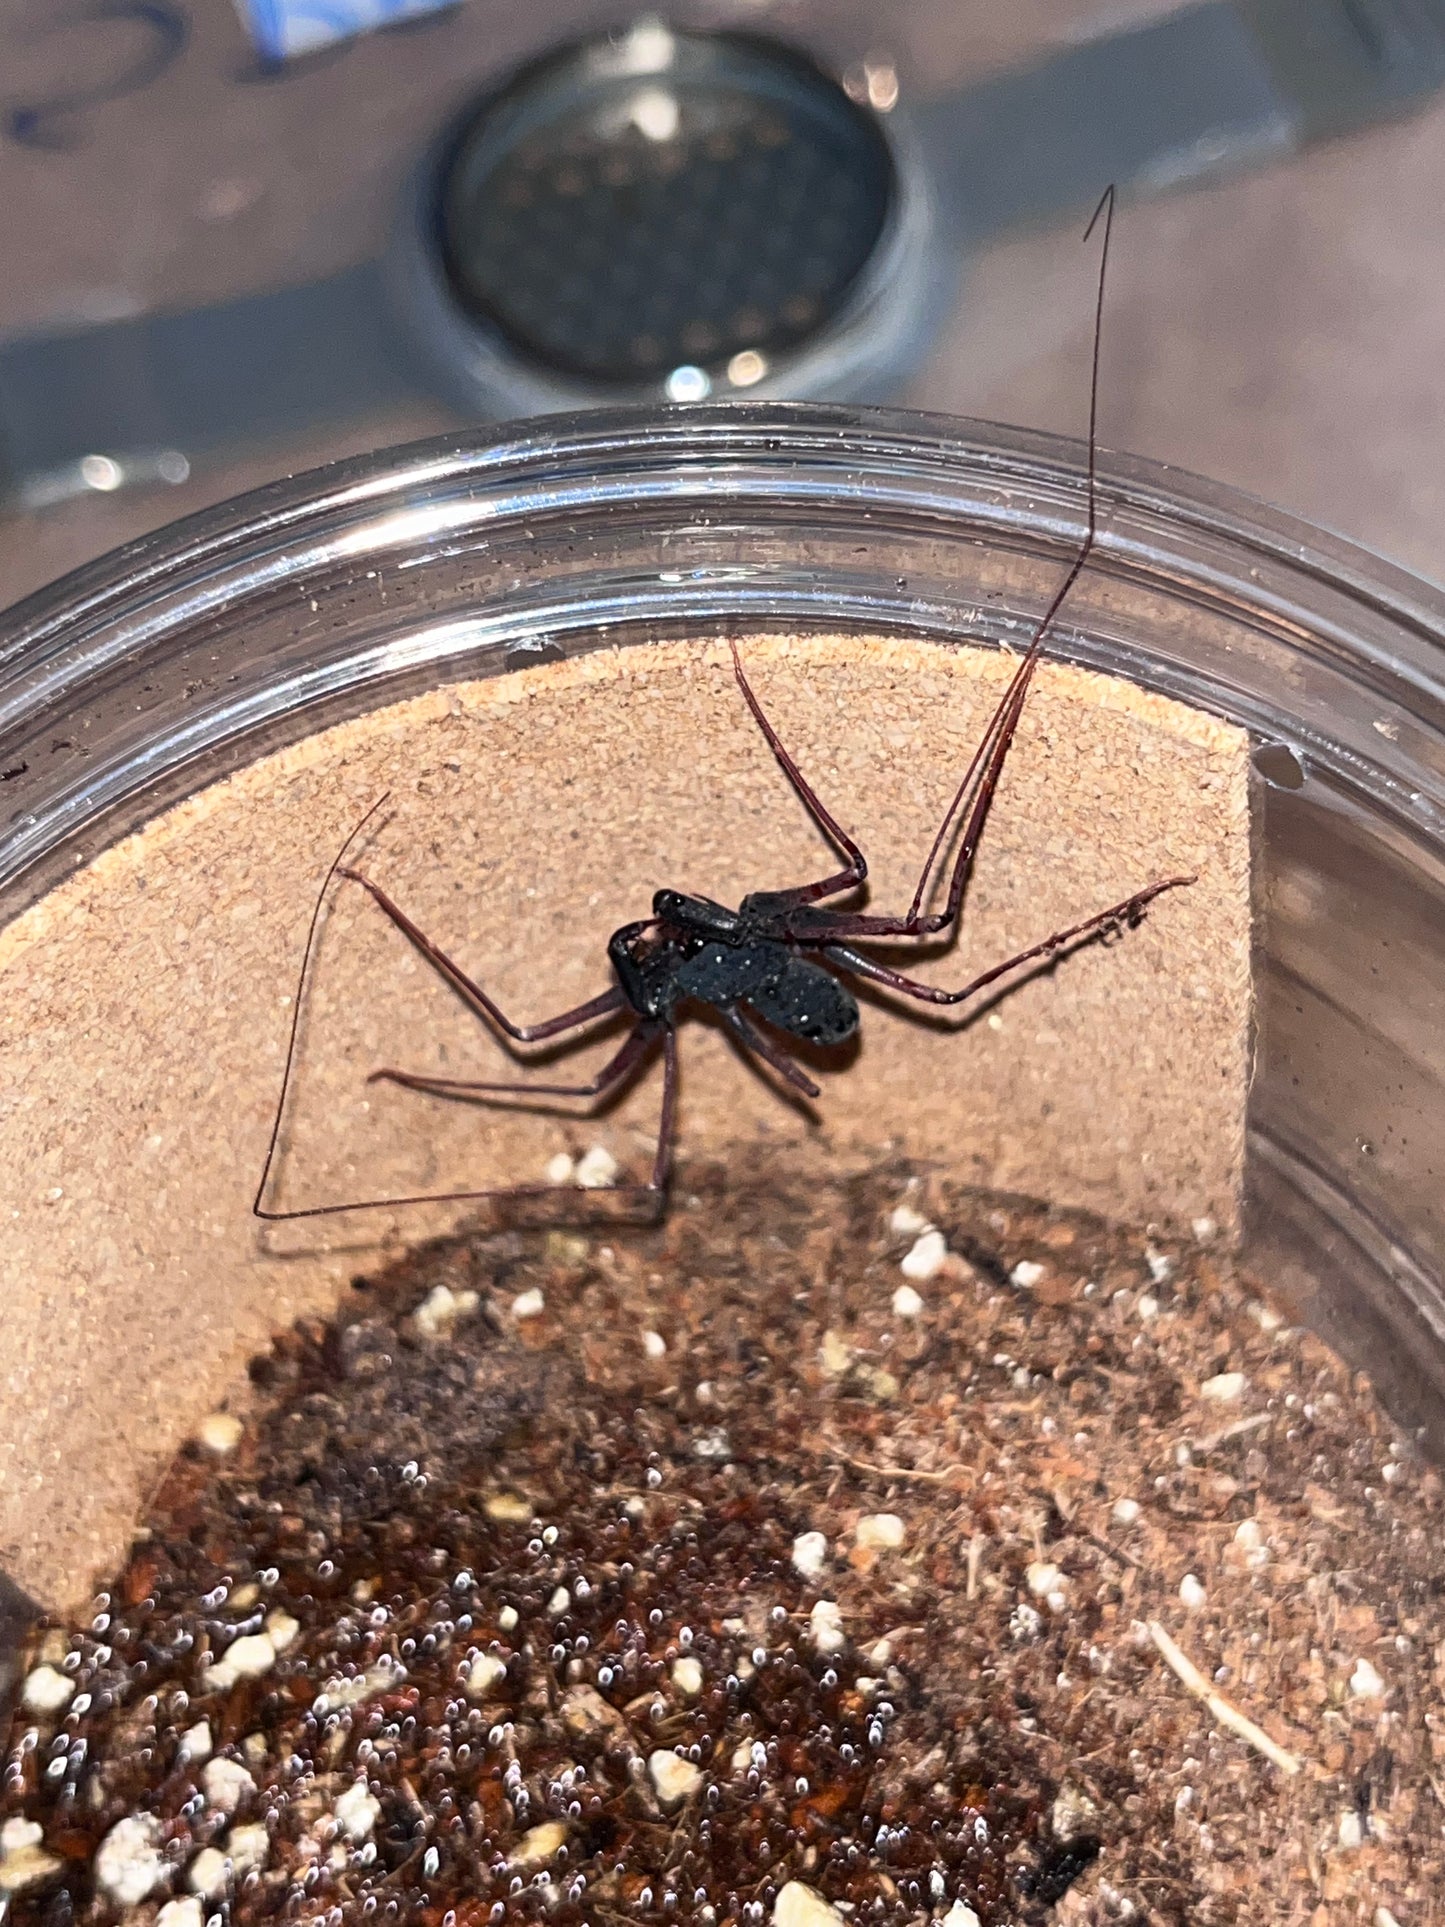 Phrynus Whitei (Central American Tailless Whipspider)